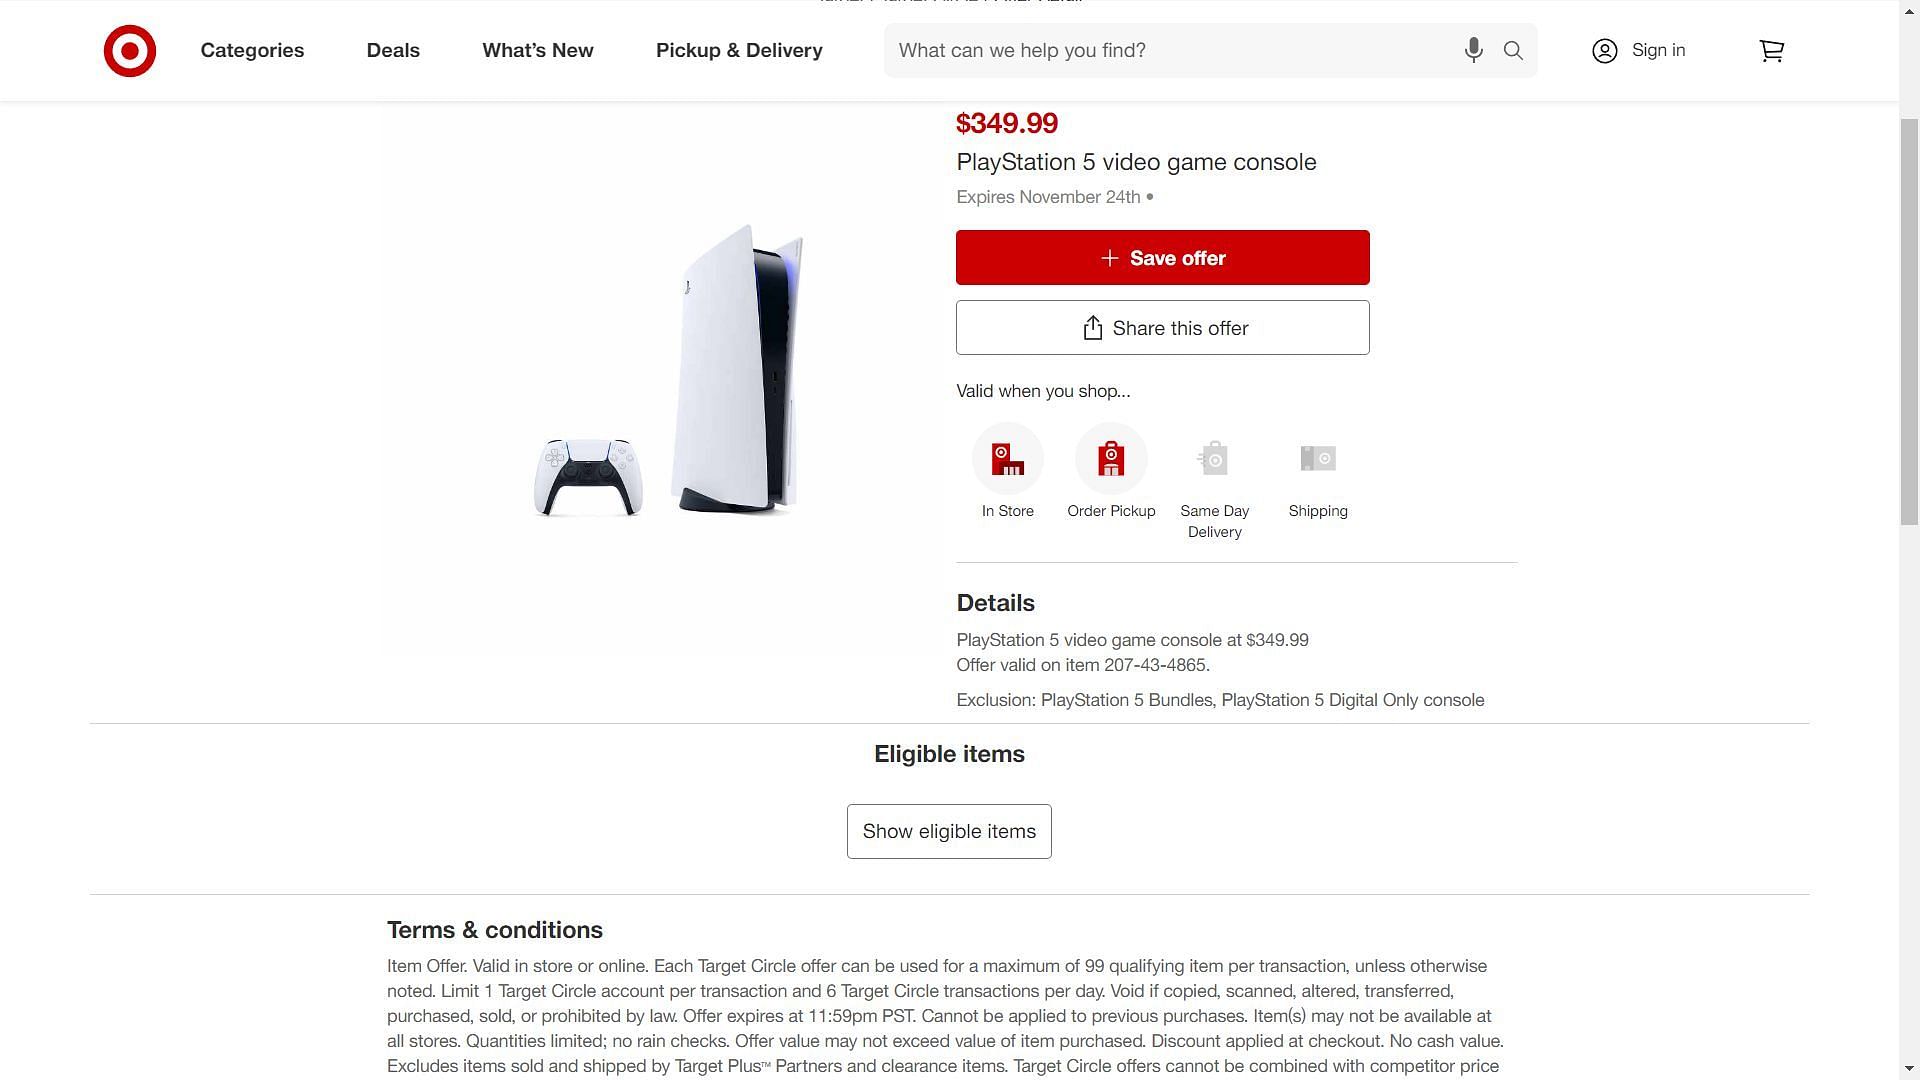 11-23-23 Sony Playstation 5 for sale at Target. One Day Only